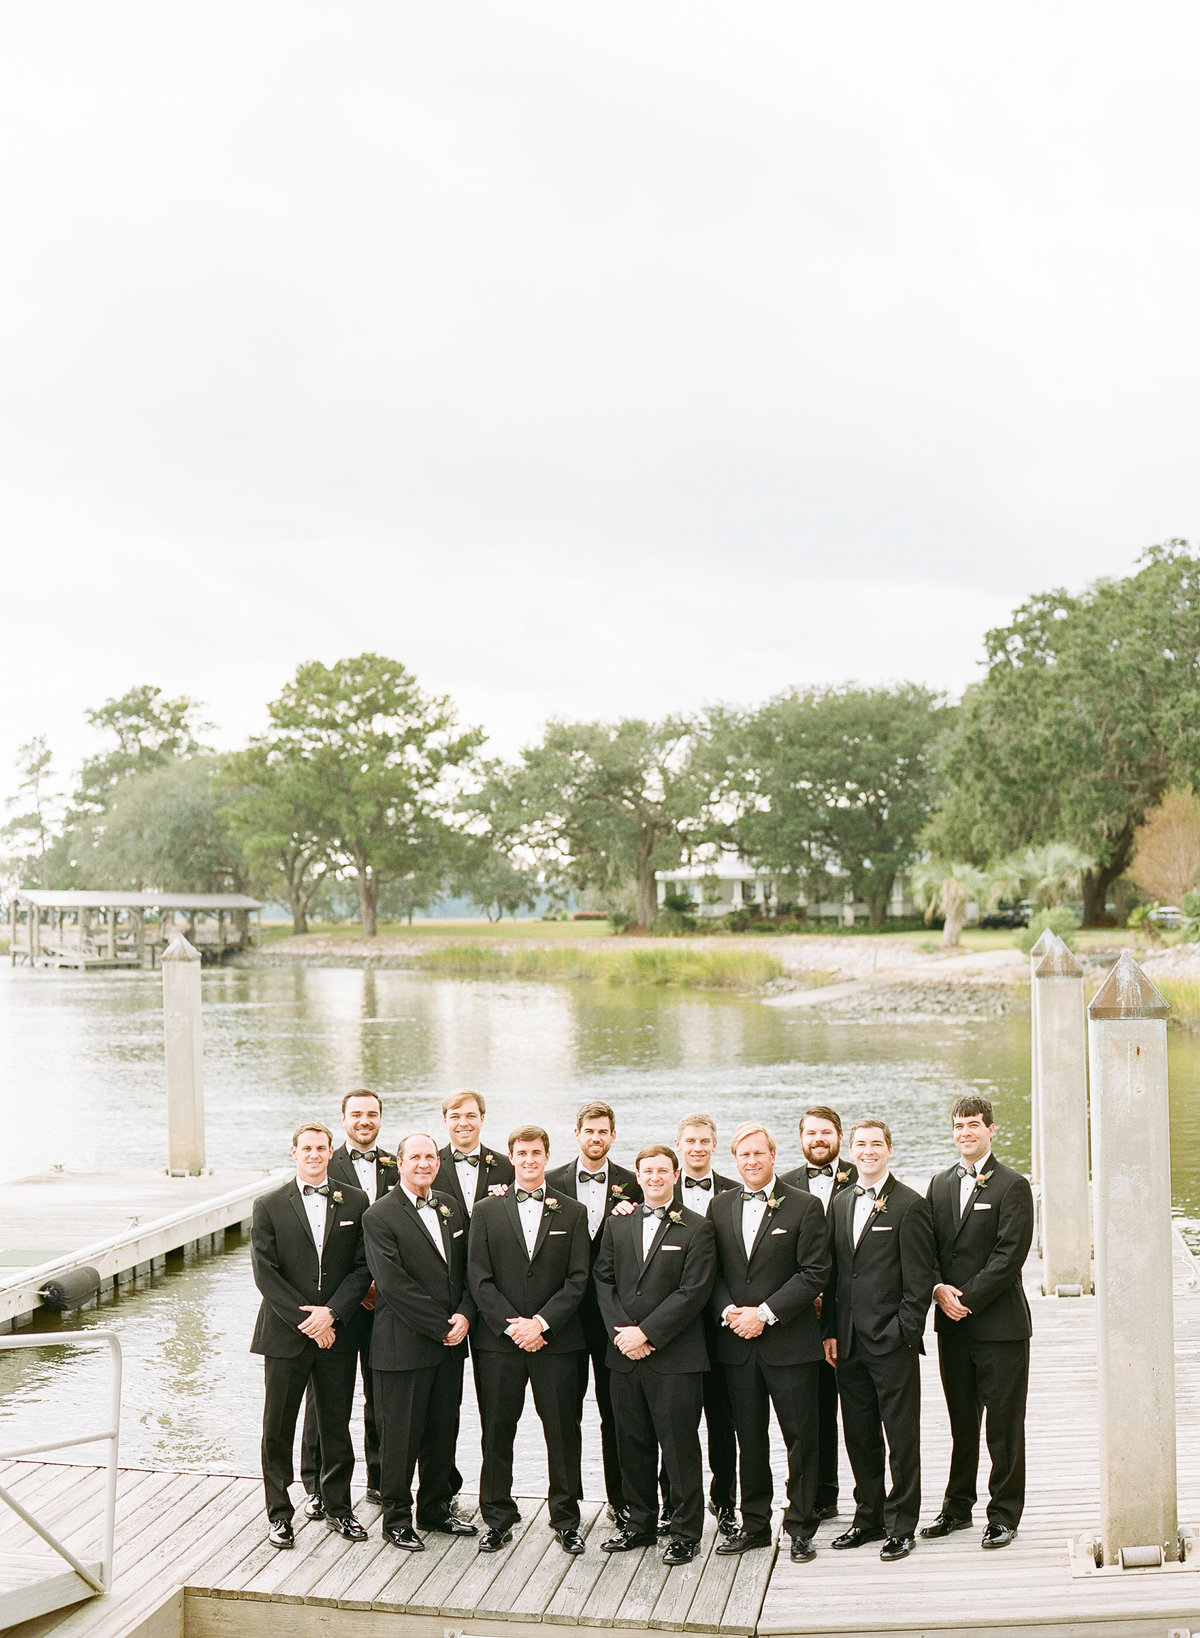 Southern Groom and Groomsmen in Black Tuxedos on Dock at Private Wadmalaw Estate